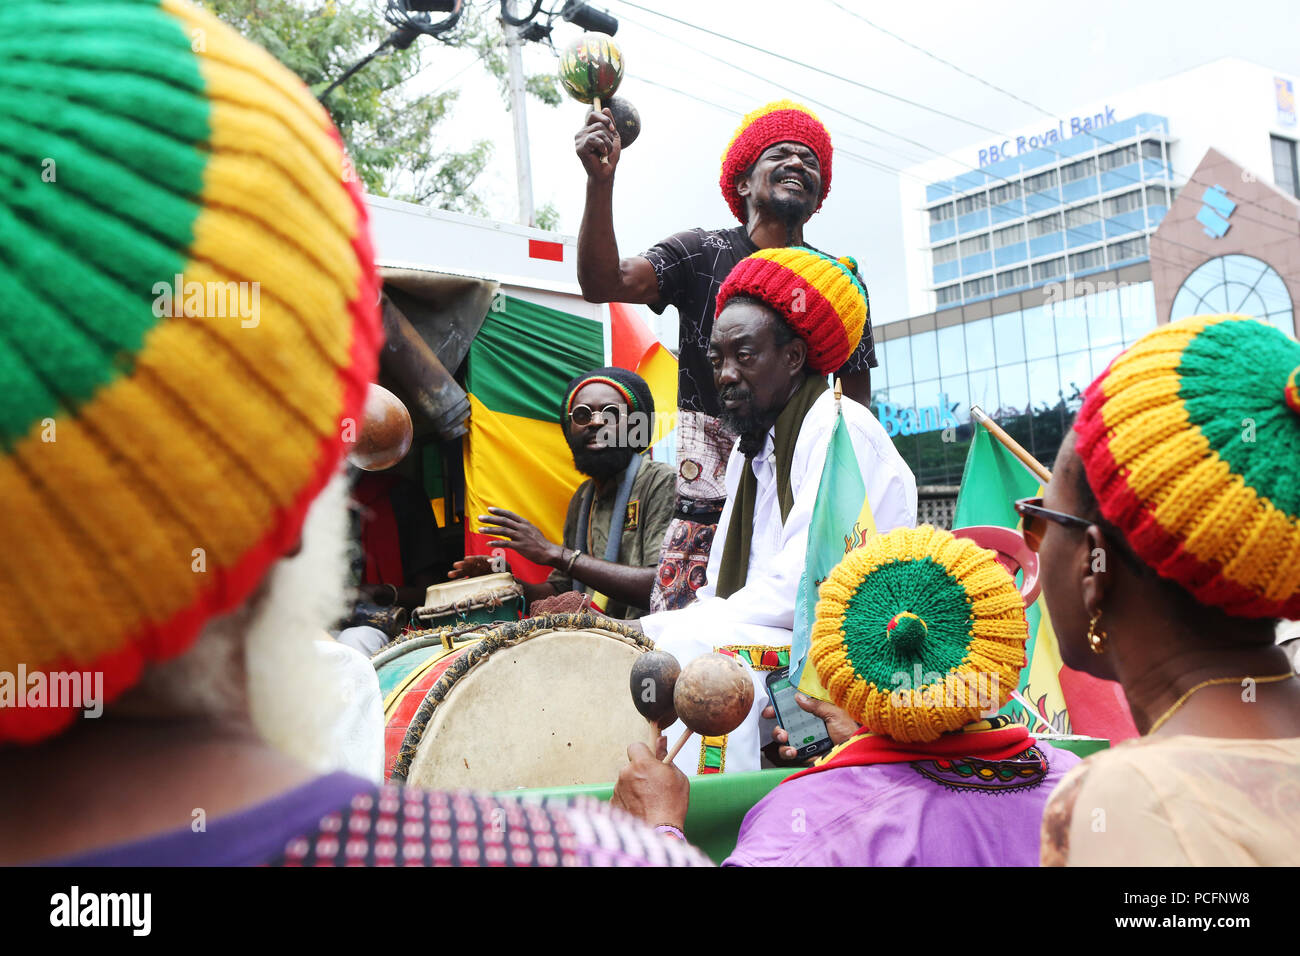 Port of Spain, Trinidad, Tobago. 1st Aug 2018. A Rastafarian group performs chants during the annual Emancipation Day observance procession from Independence Square to the Lidj Yasu Omowale Emancipation Village in the Queens' Park Savannah on August 1, 2018 in Port of Spain, Trinidad. (Photo by Sean Drakes/Alamy Live News) Stock Photo